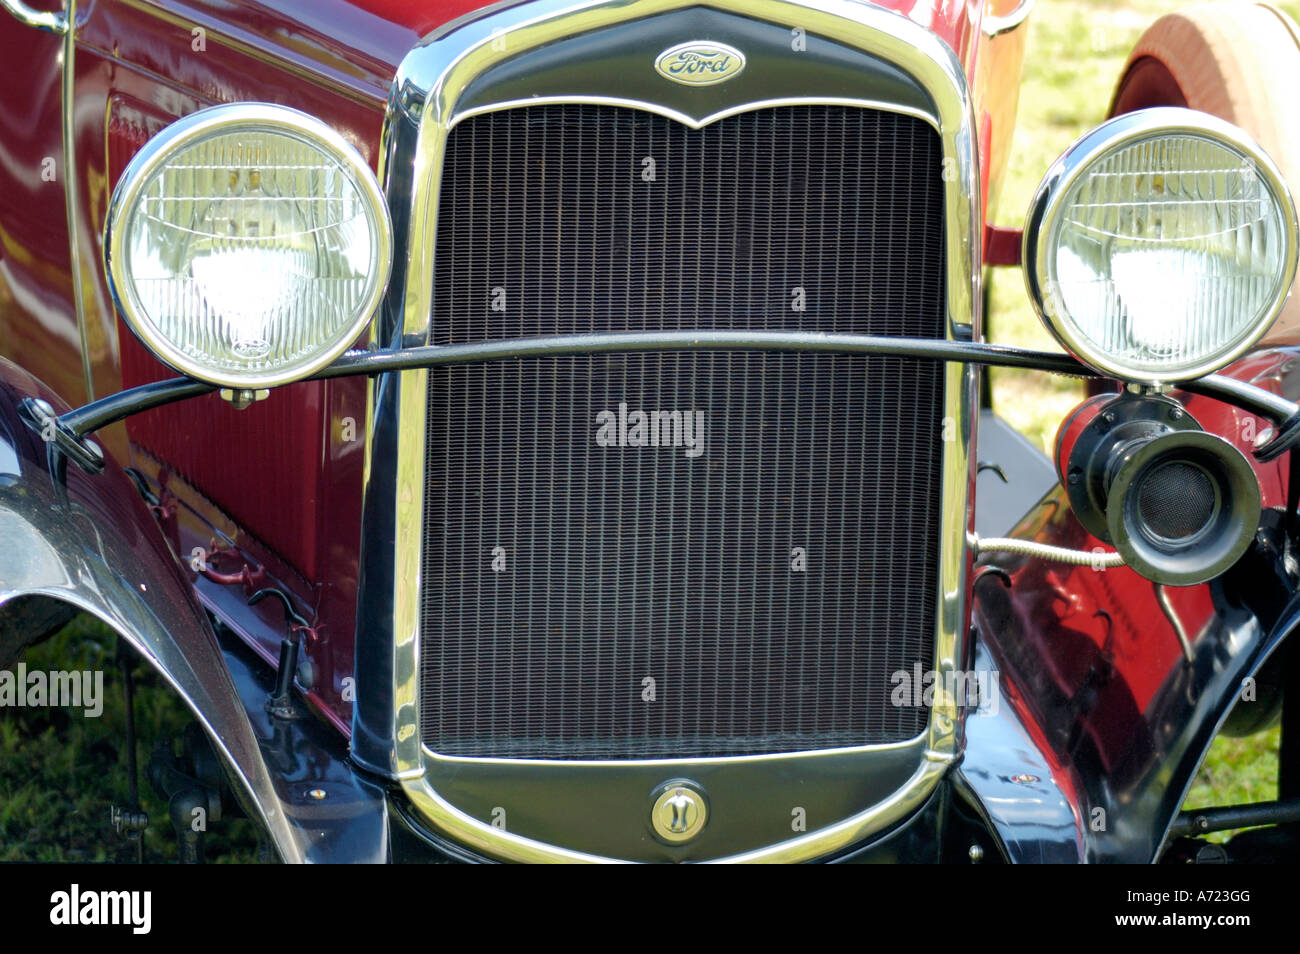 Front grill of a vintage Ford Model A automobile from 1930s Stock Photo -  Alamy